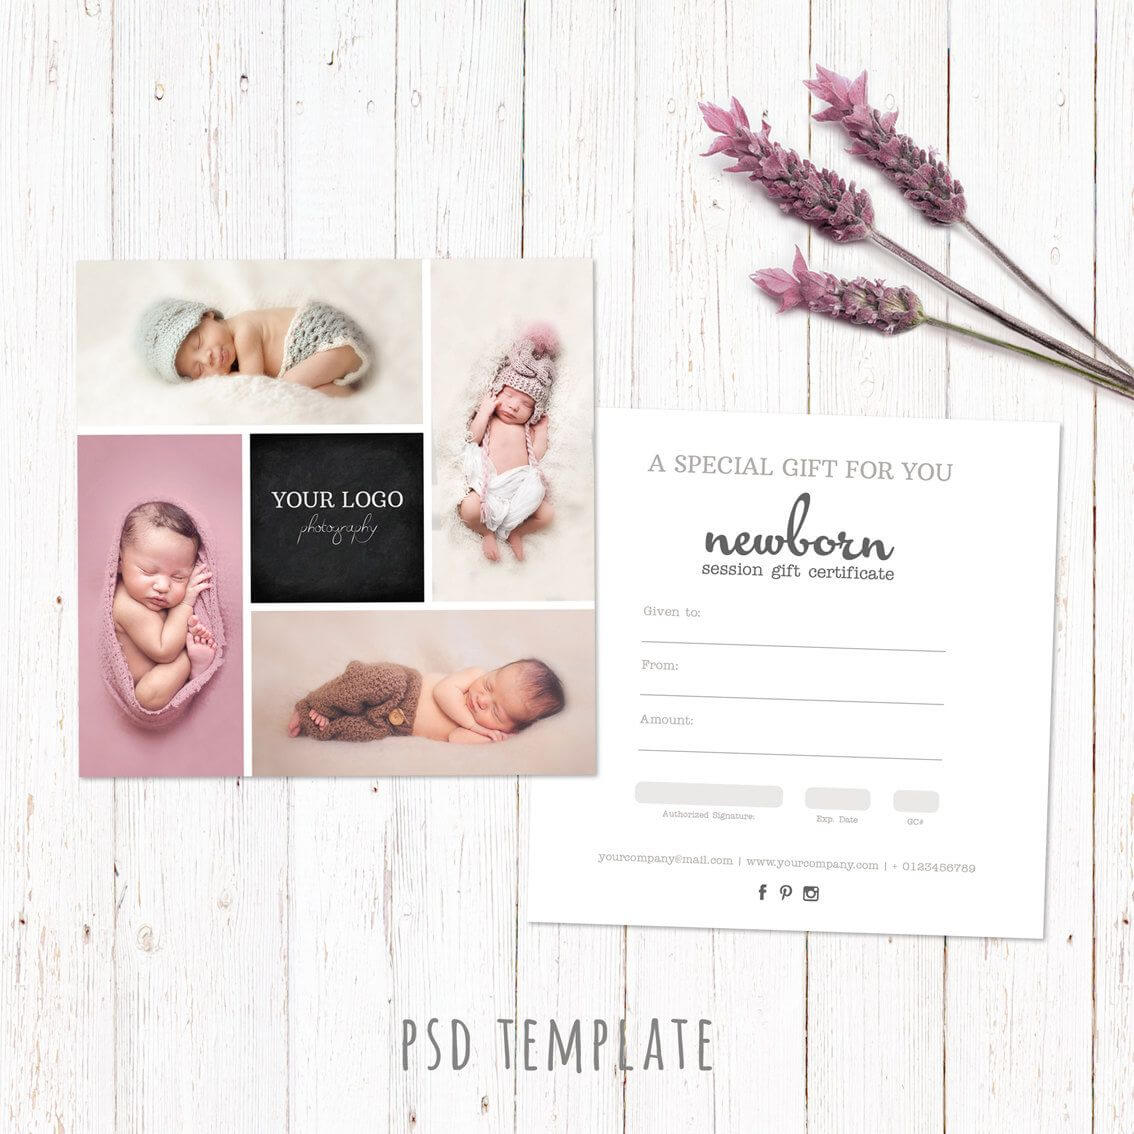 Gift Certificate Template. Newborn Session Photography Gift Regarding Photoshoot Gift Certificate Template